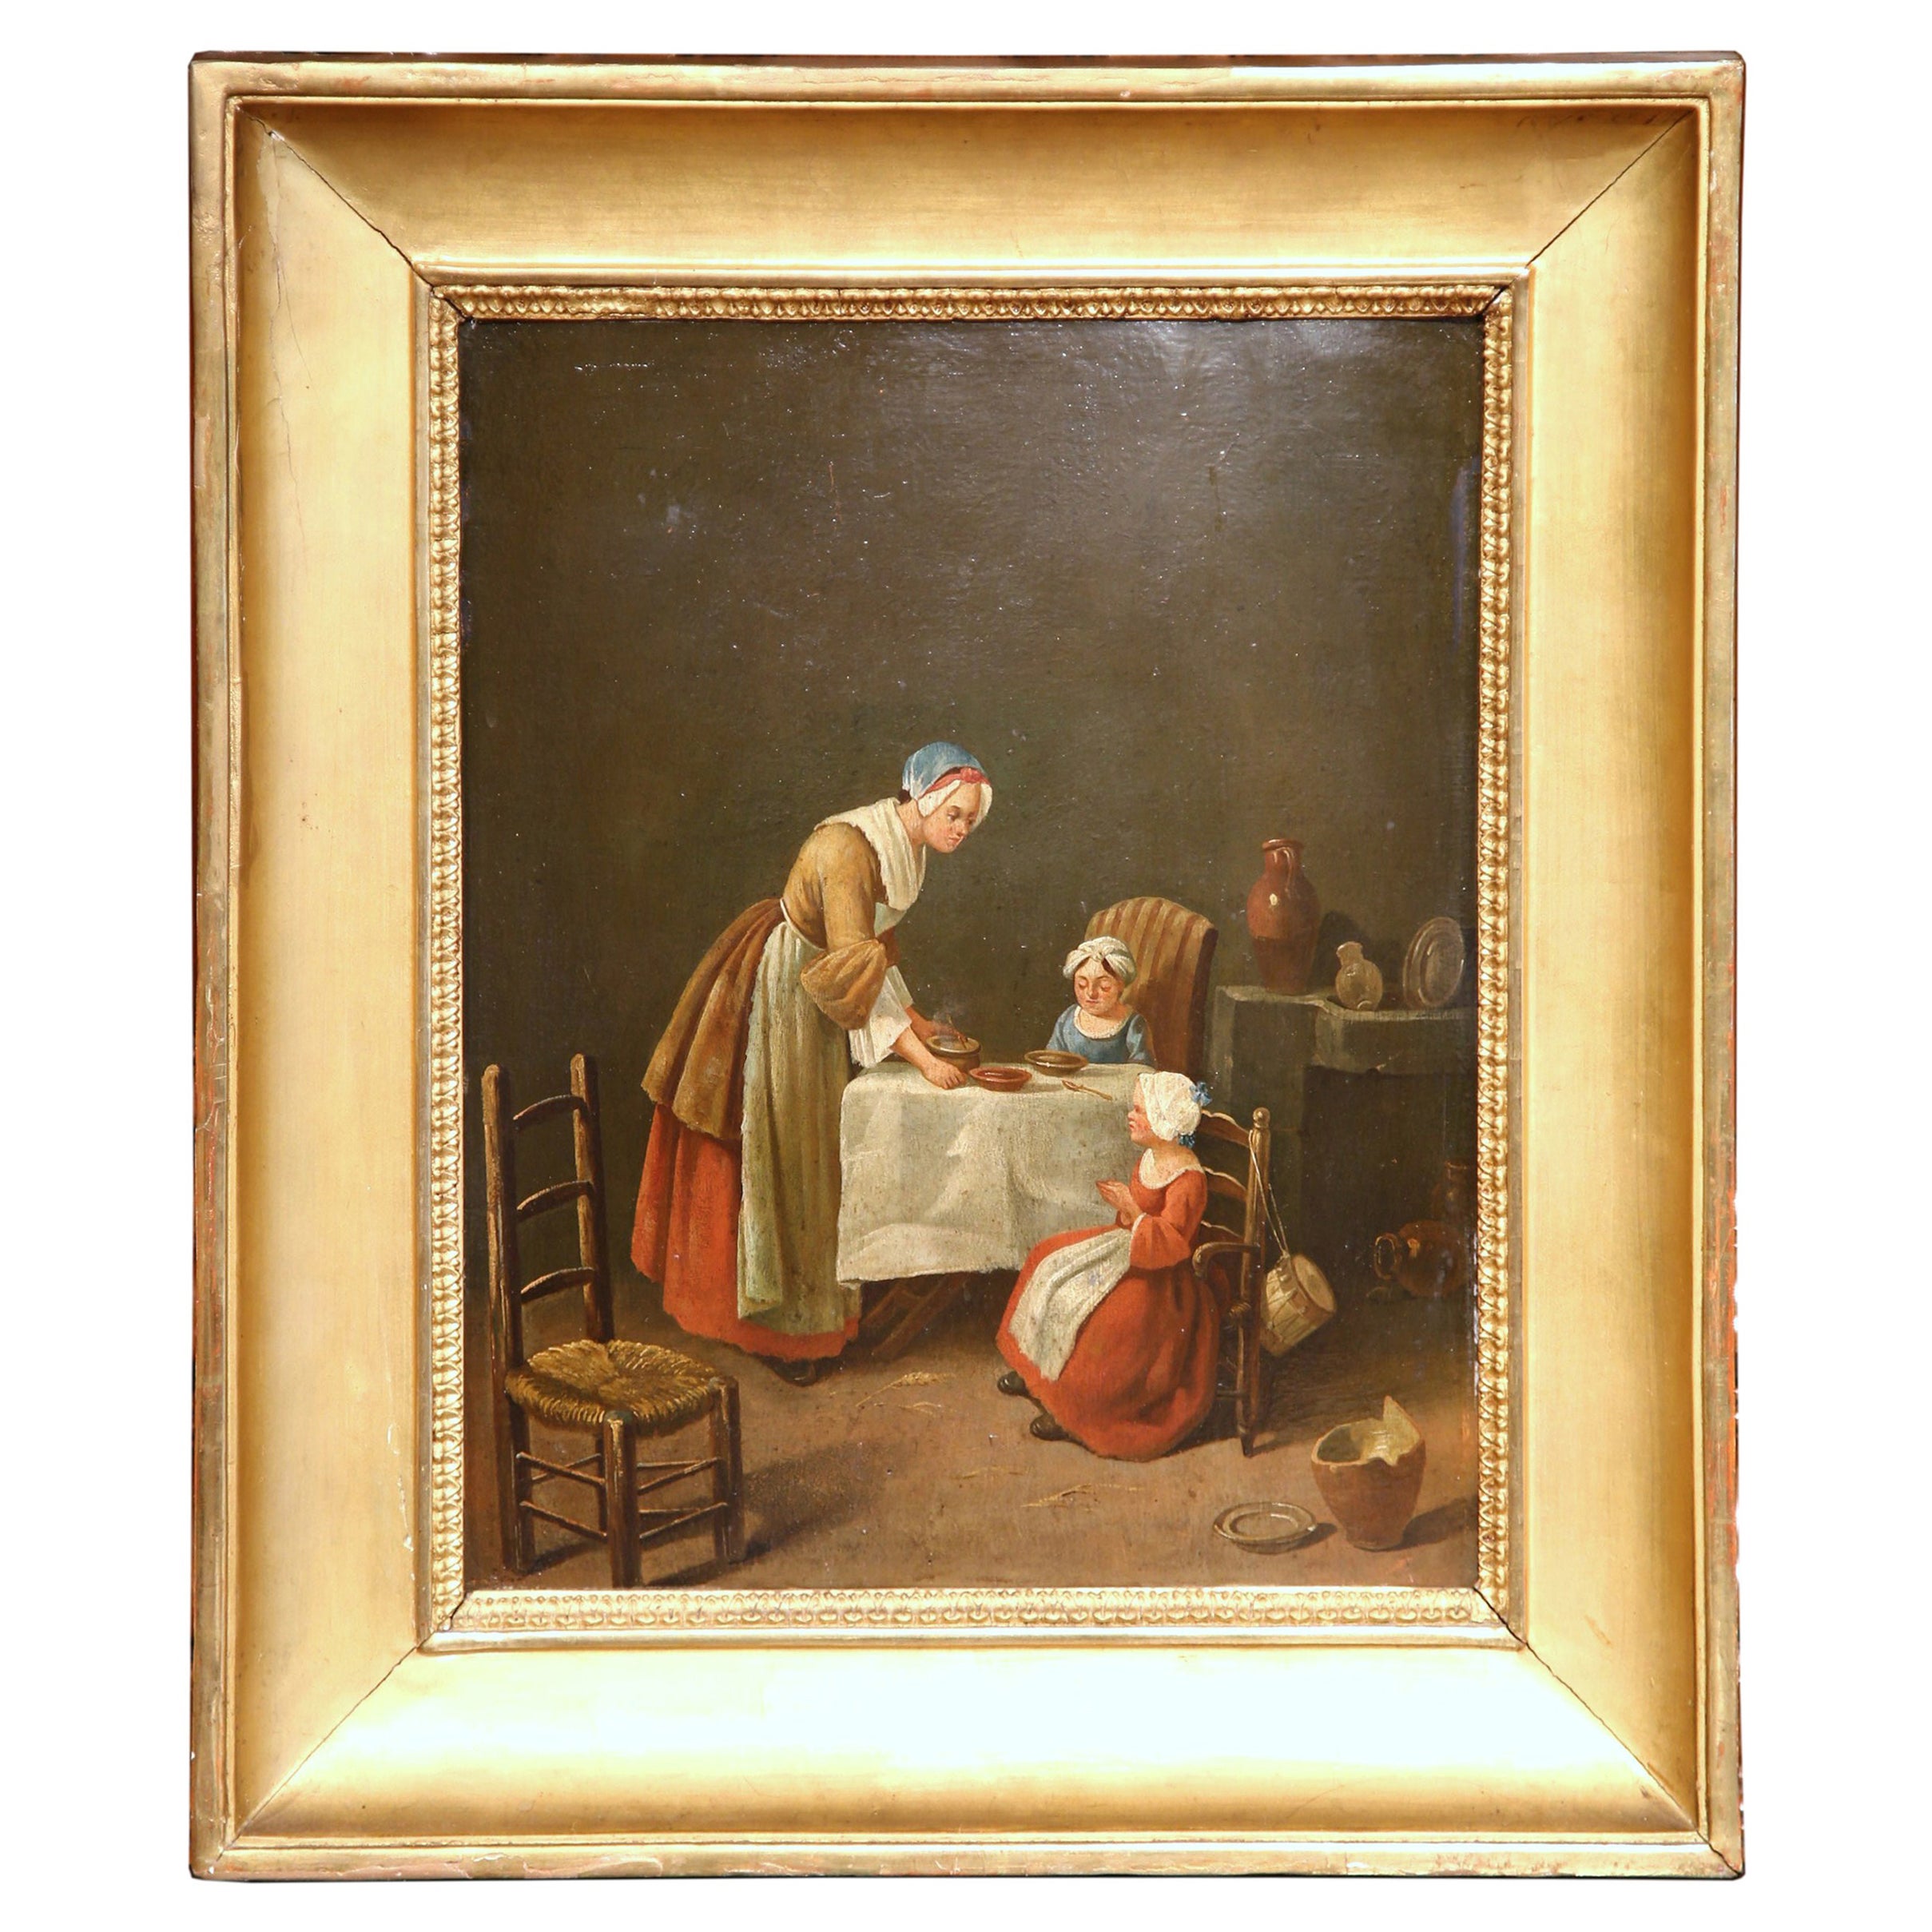 19th Century French Oil on Board Painting "Saying Grace" in Carved Gilt Frame